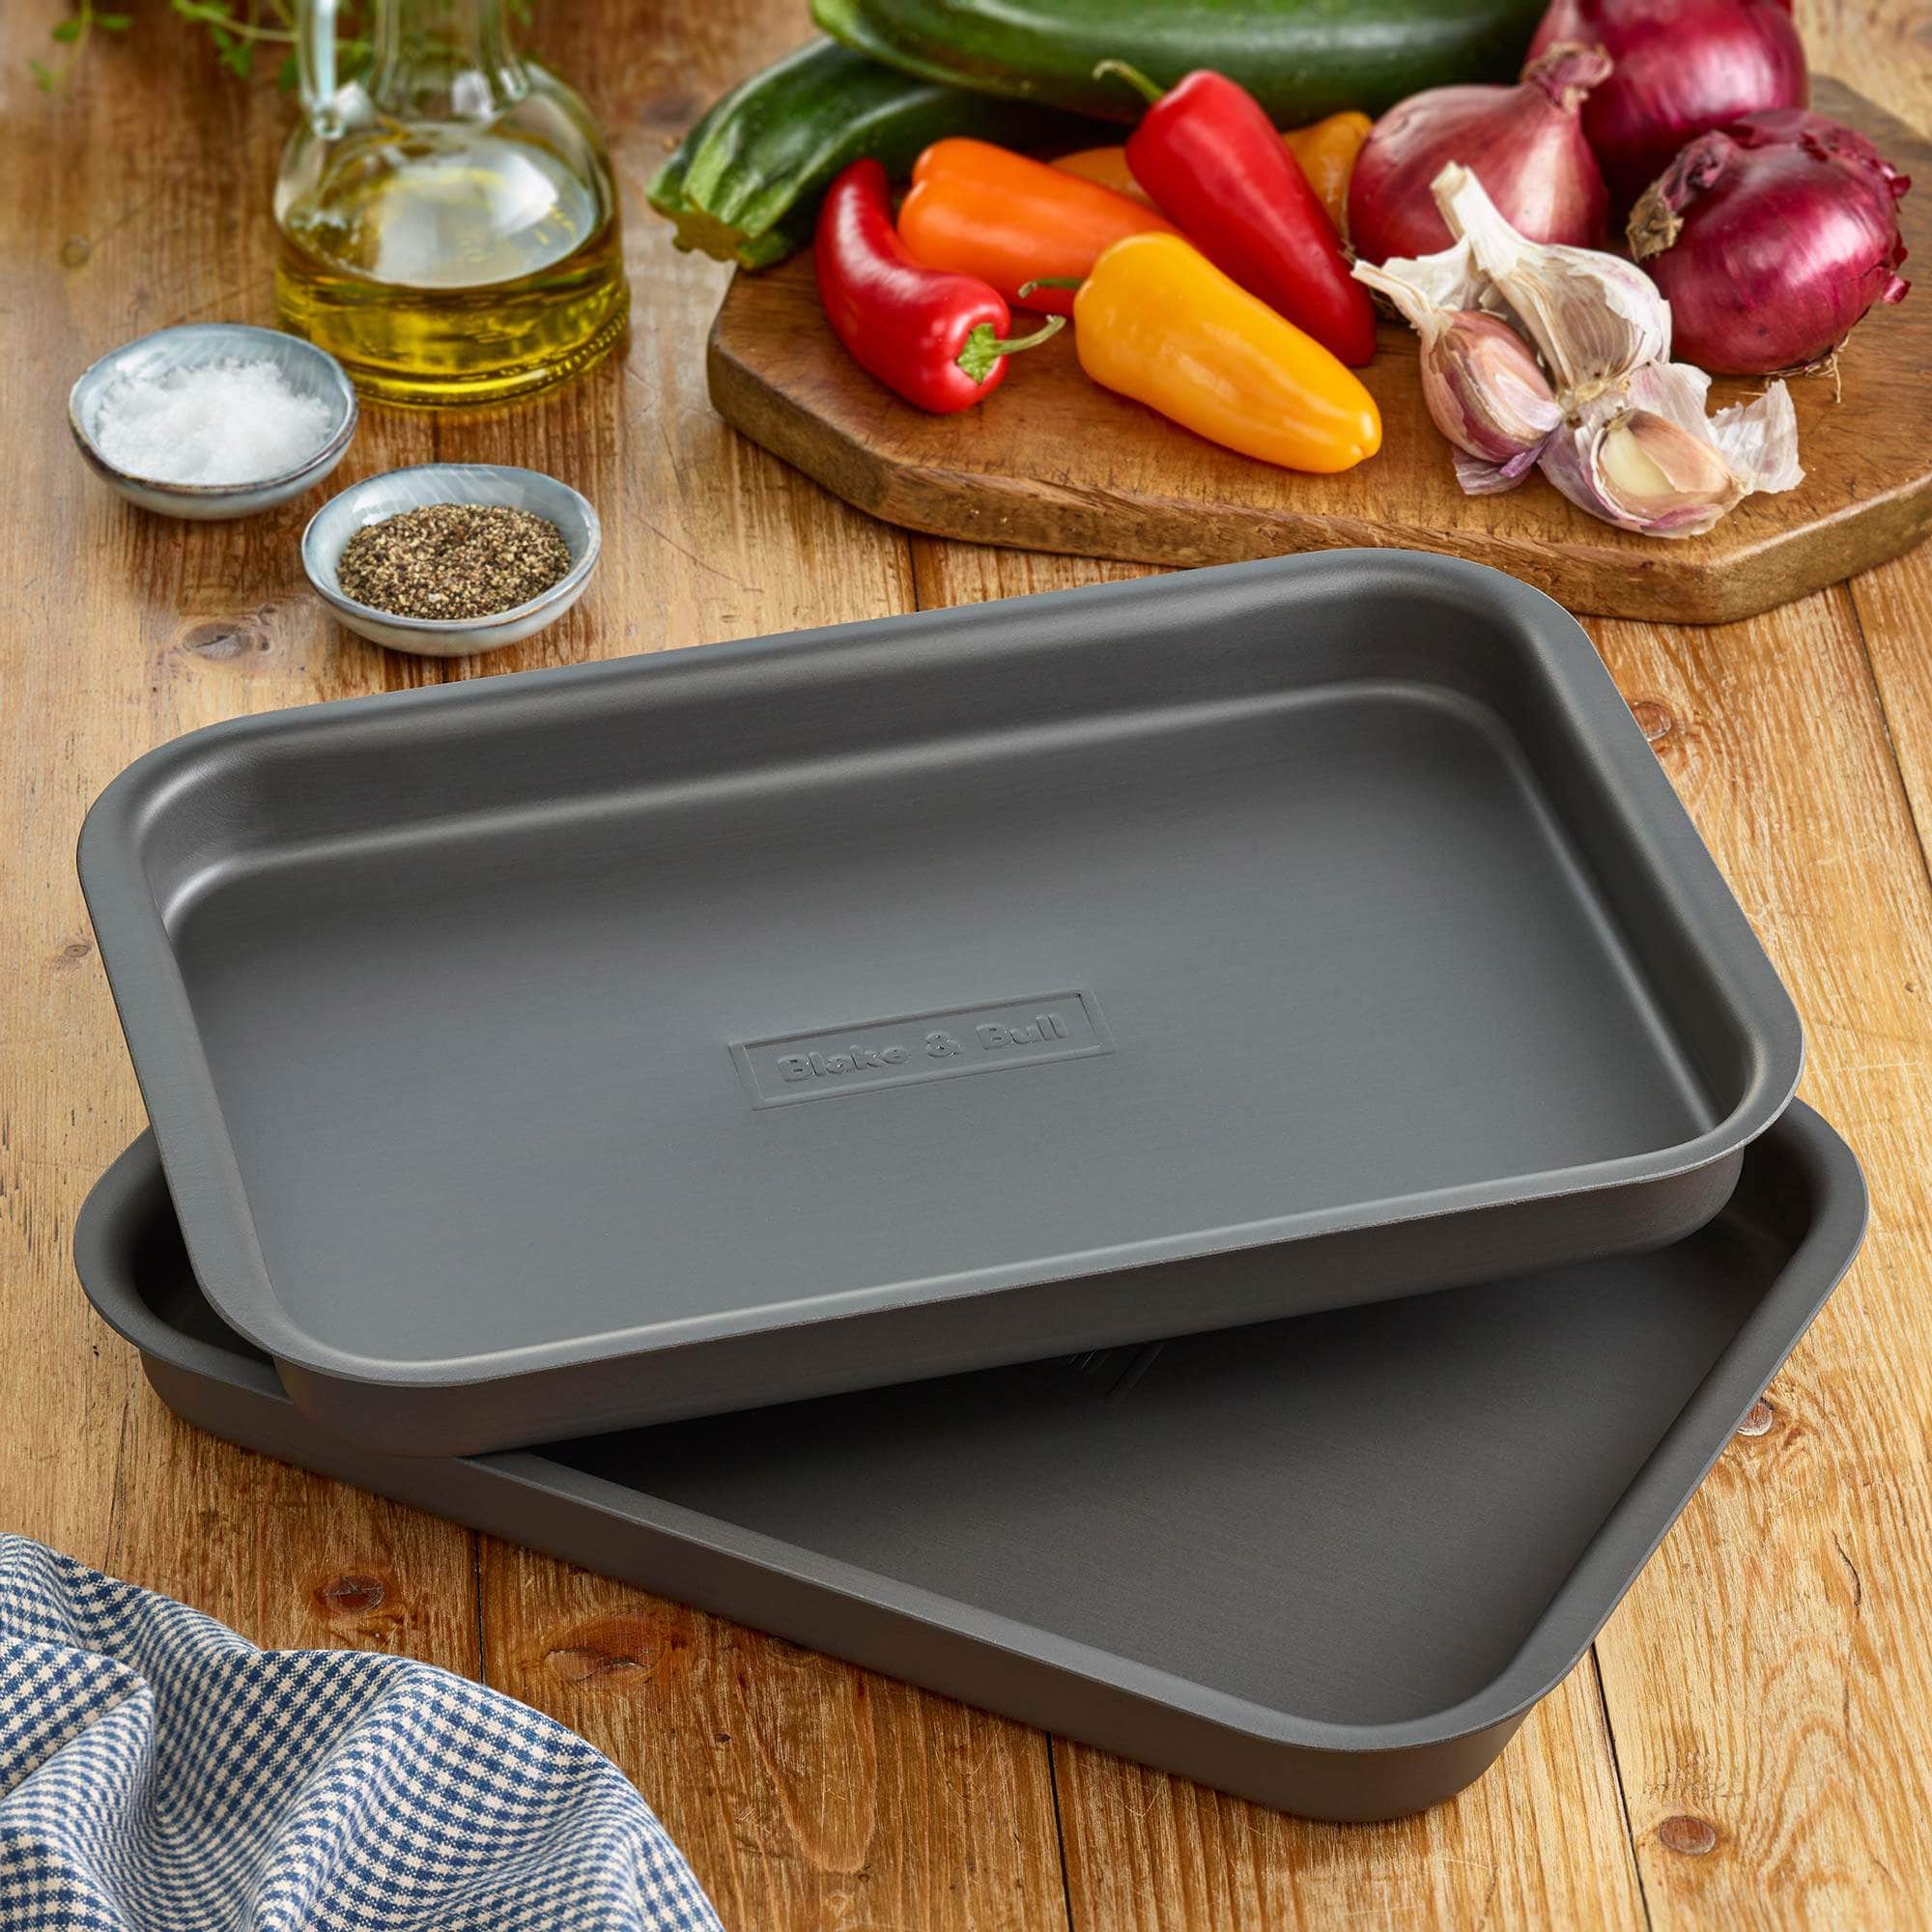 Half Oven' Baking Tray for use with Aga Range Cookers